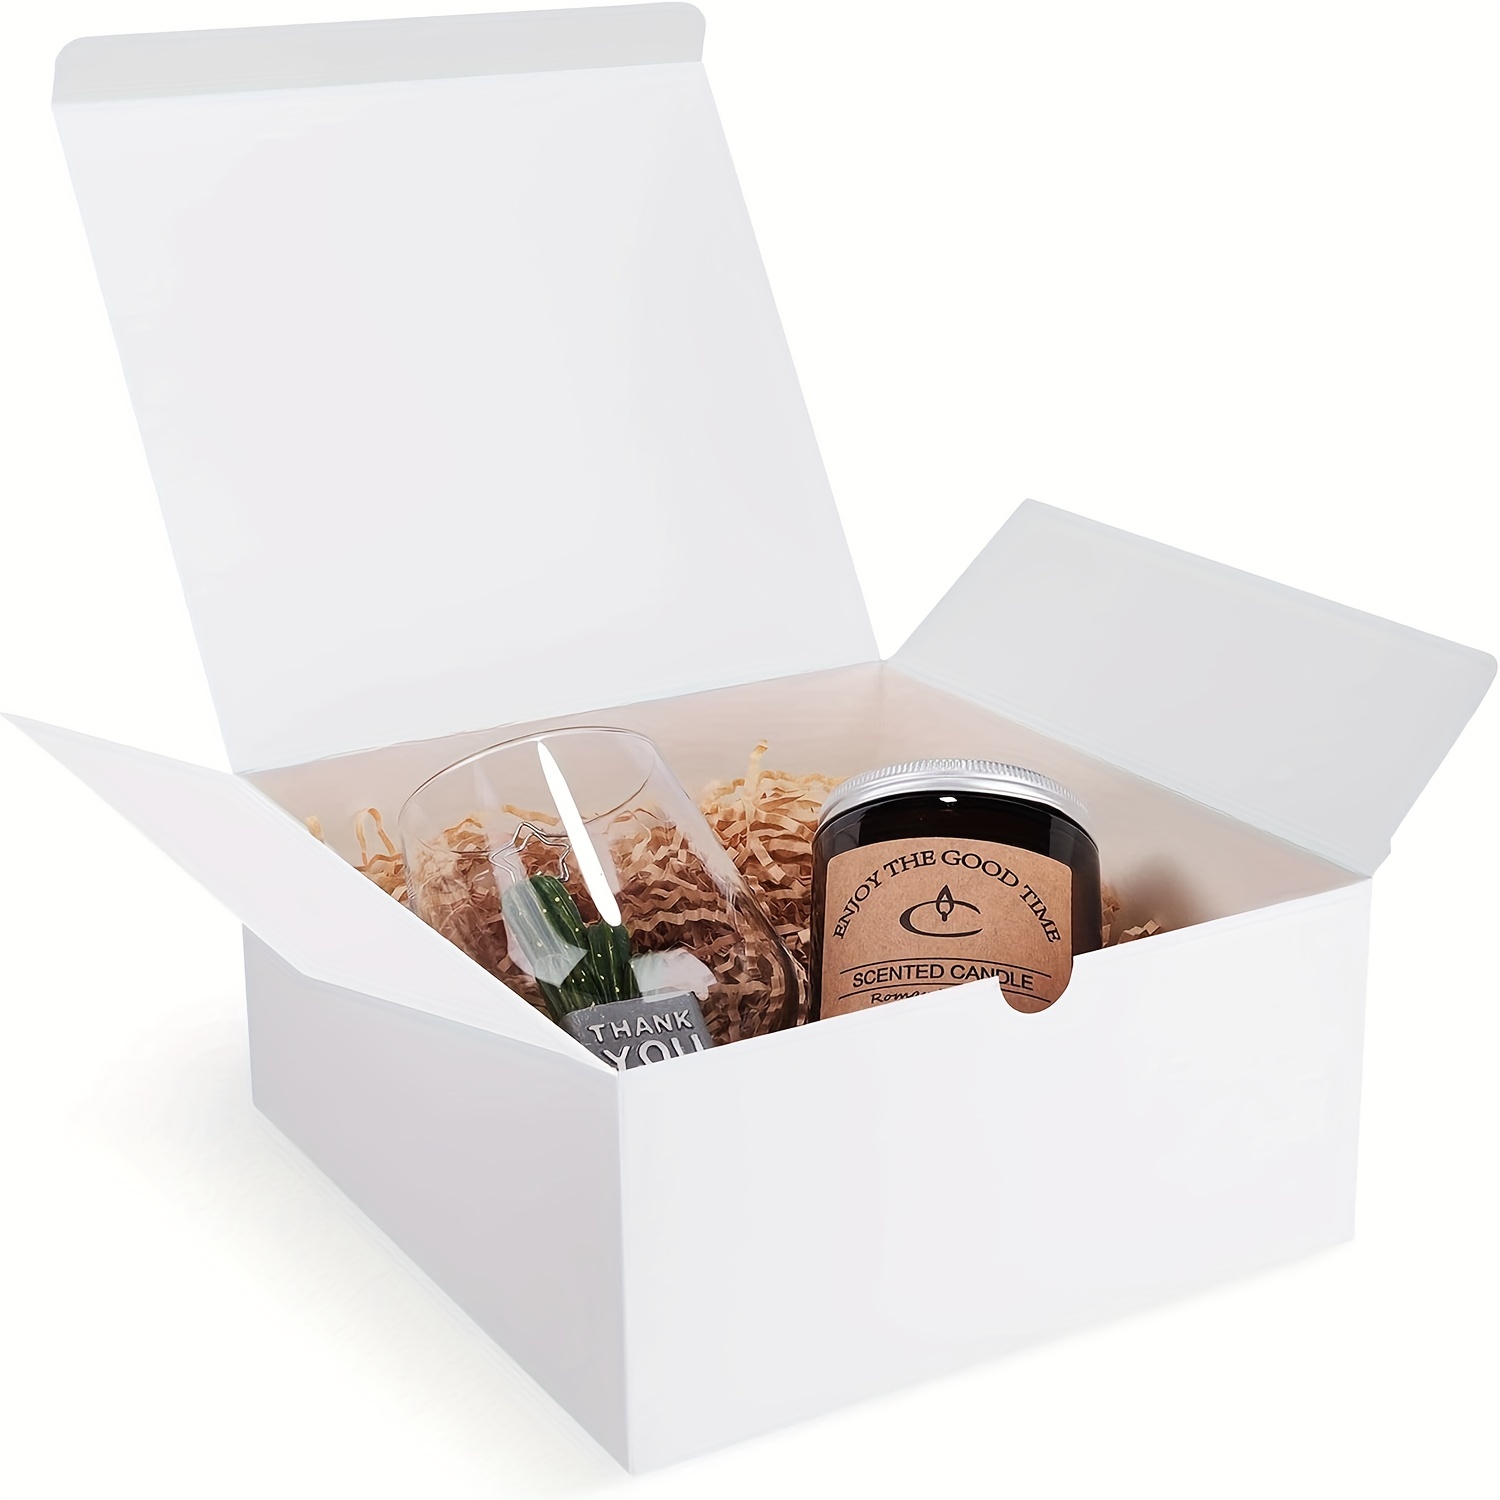 10 Viable Ideas for Crafty Gift Packaging